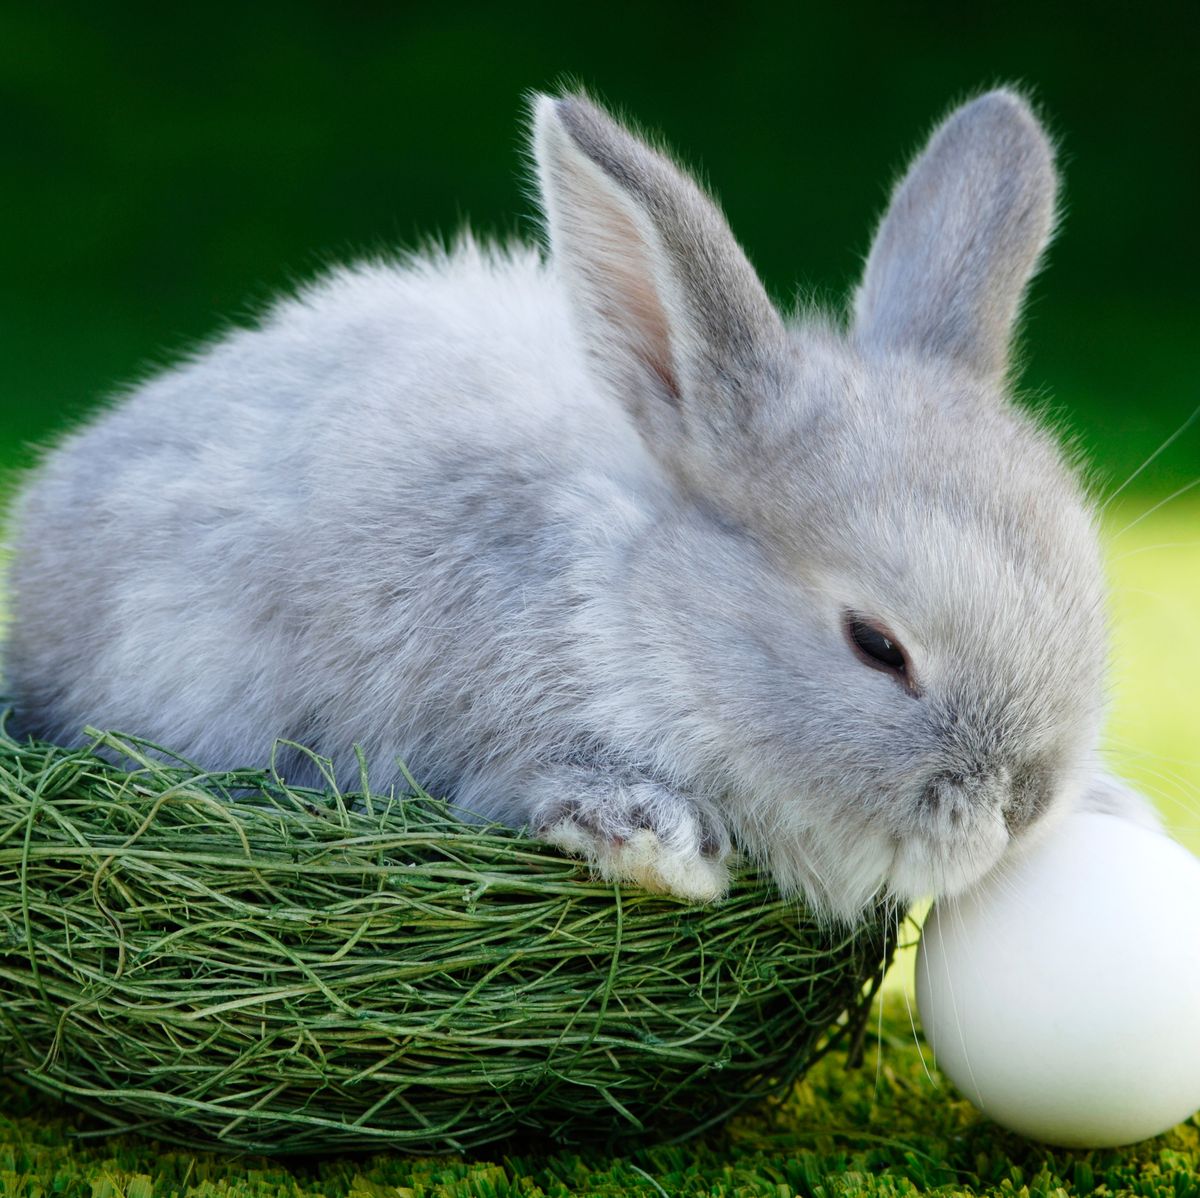 Why is Easter associated with bunnies and eggs?